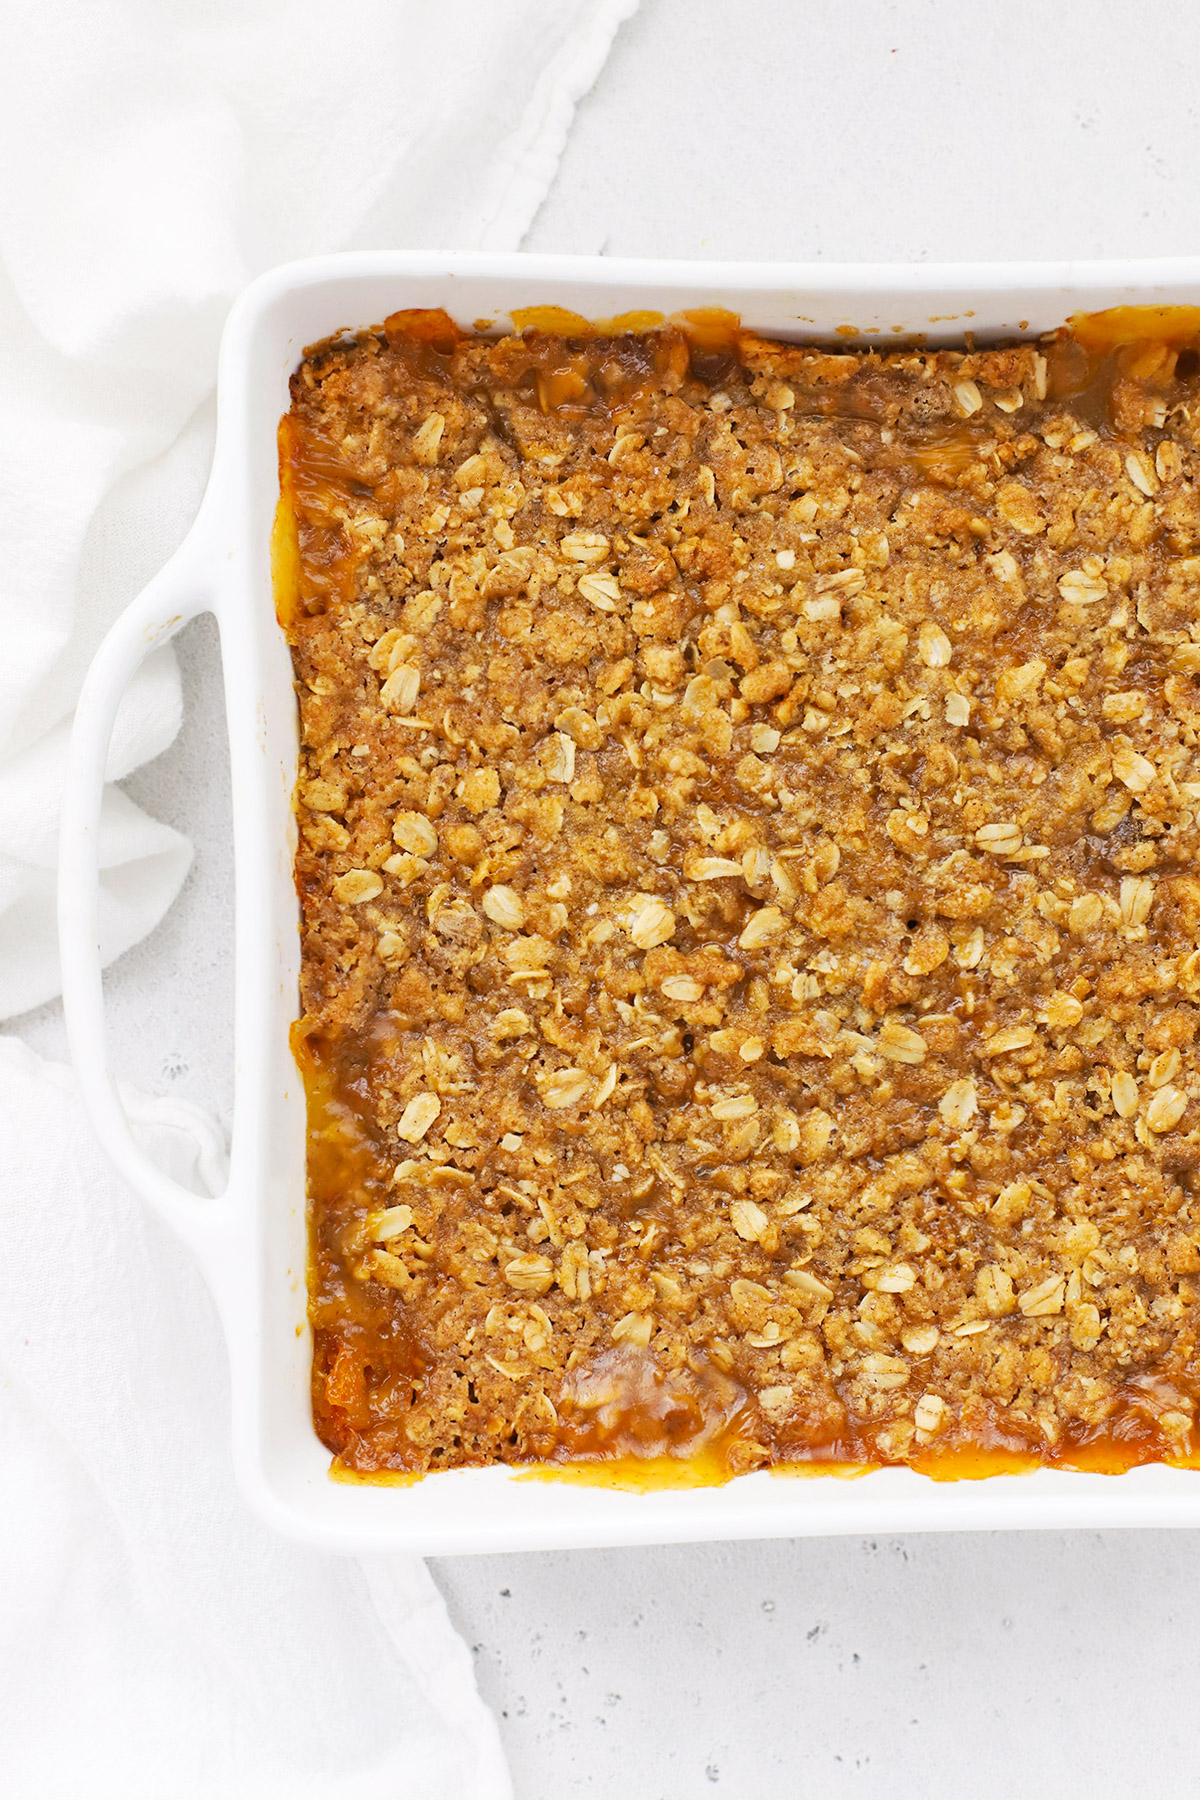 Gluten-Free peach crisp in a white baking dish fresh from the oven